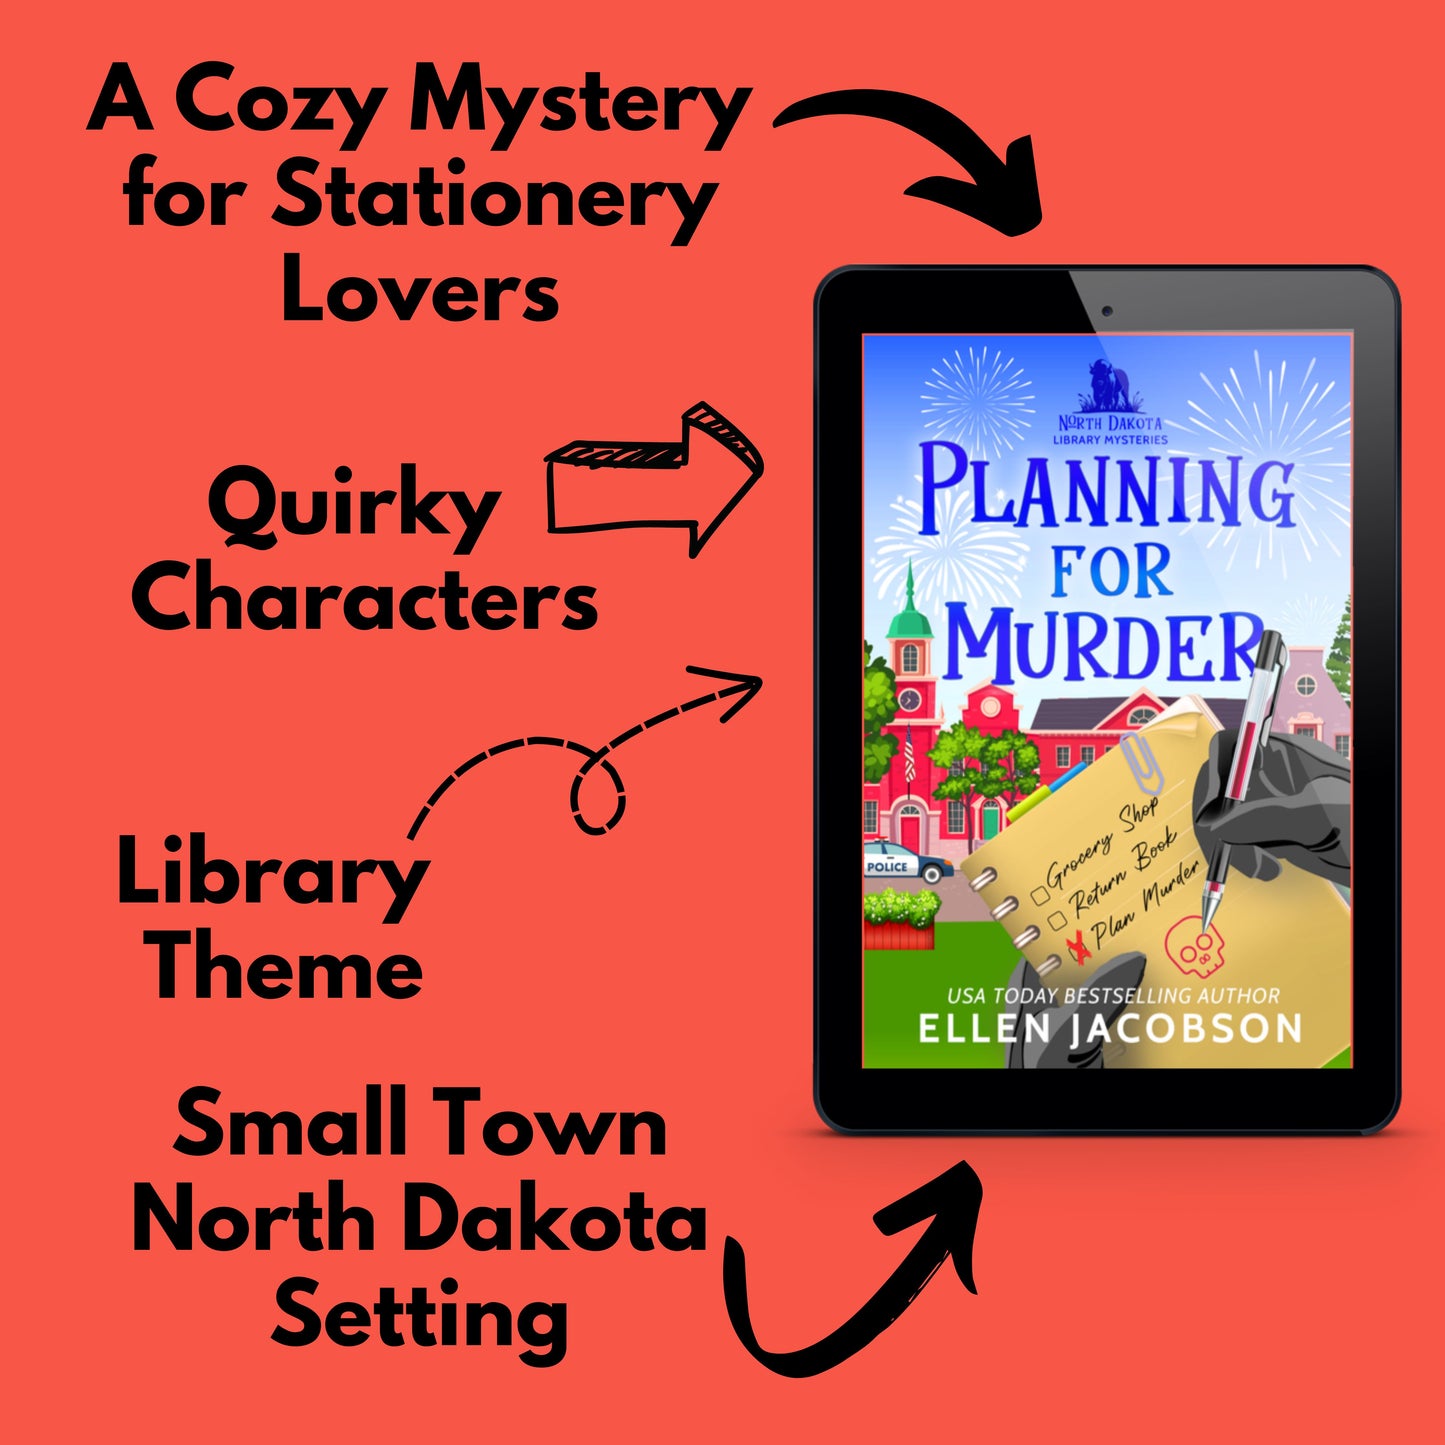 Image: Planning for Murder cozy mystery novella ebook by Ellen Jacobson